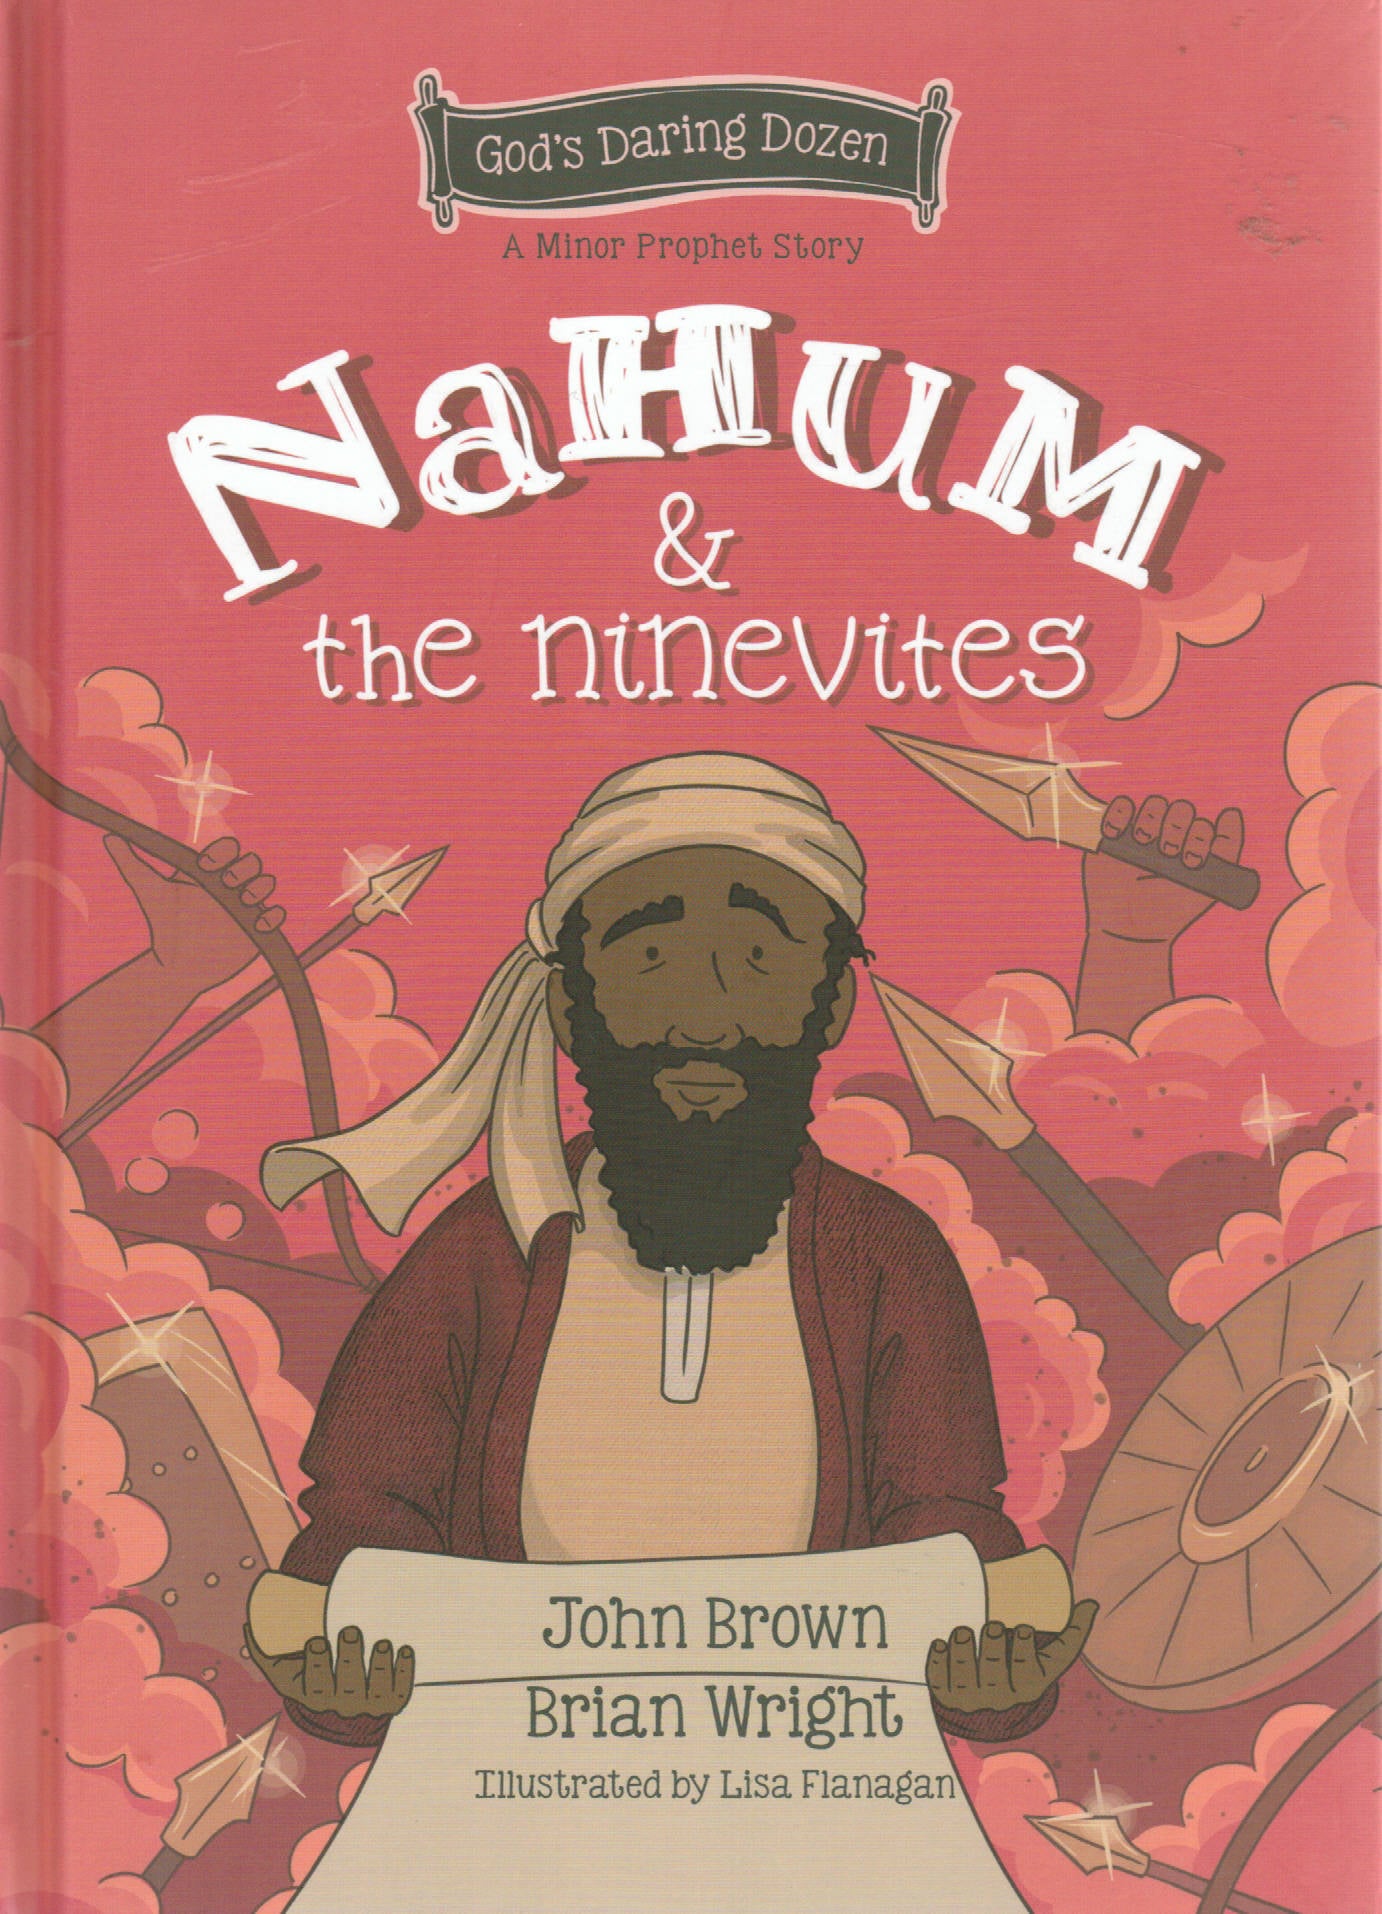 A Minor Prophet Story - Nahum and the Ninevites